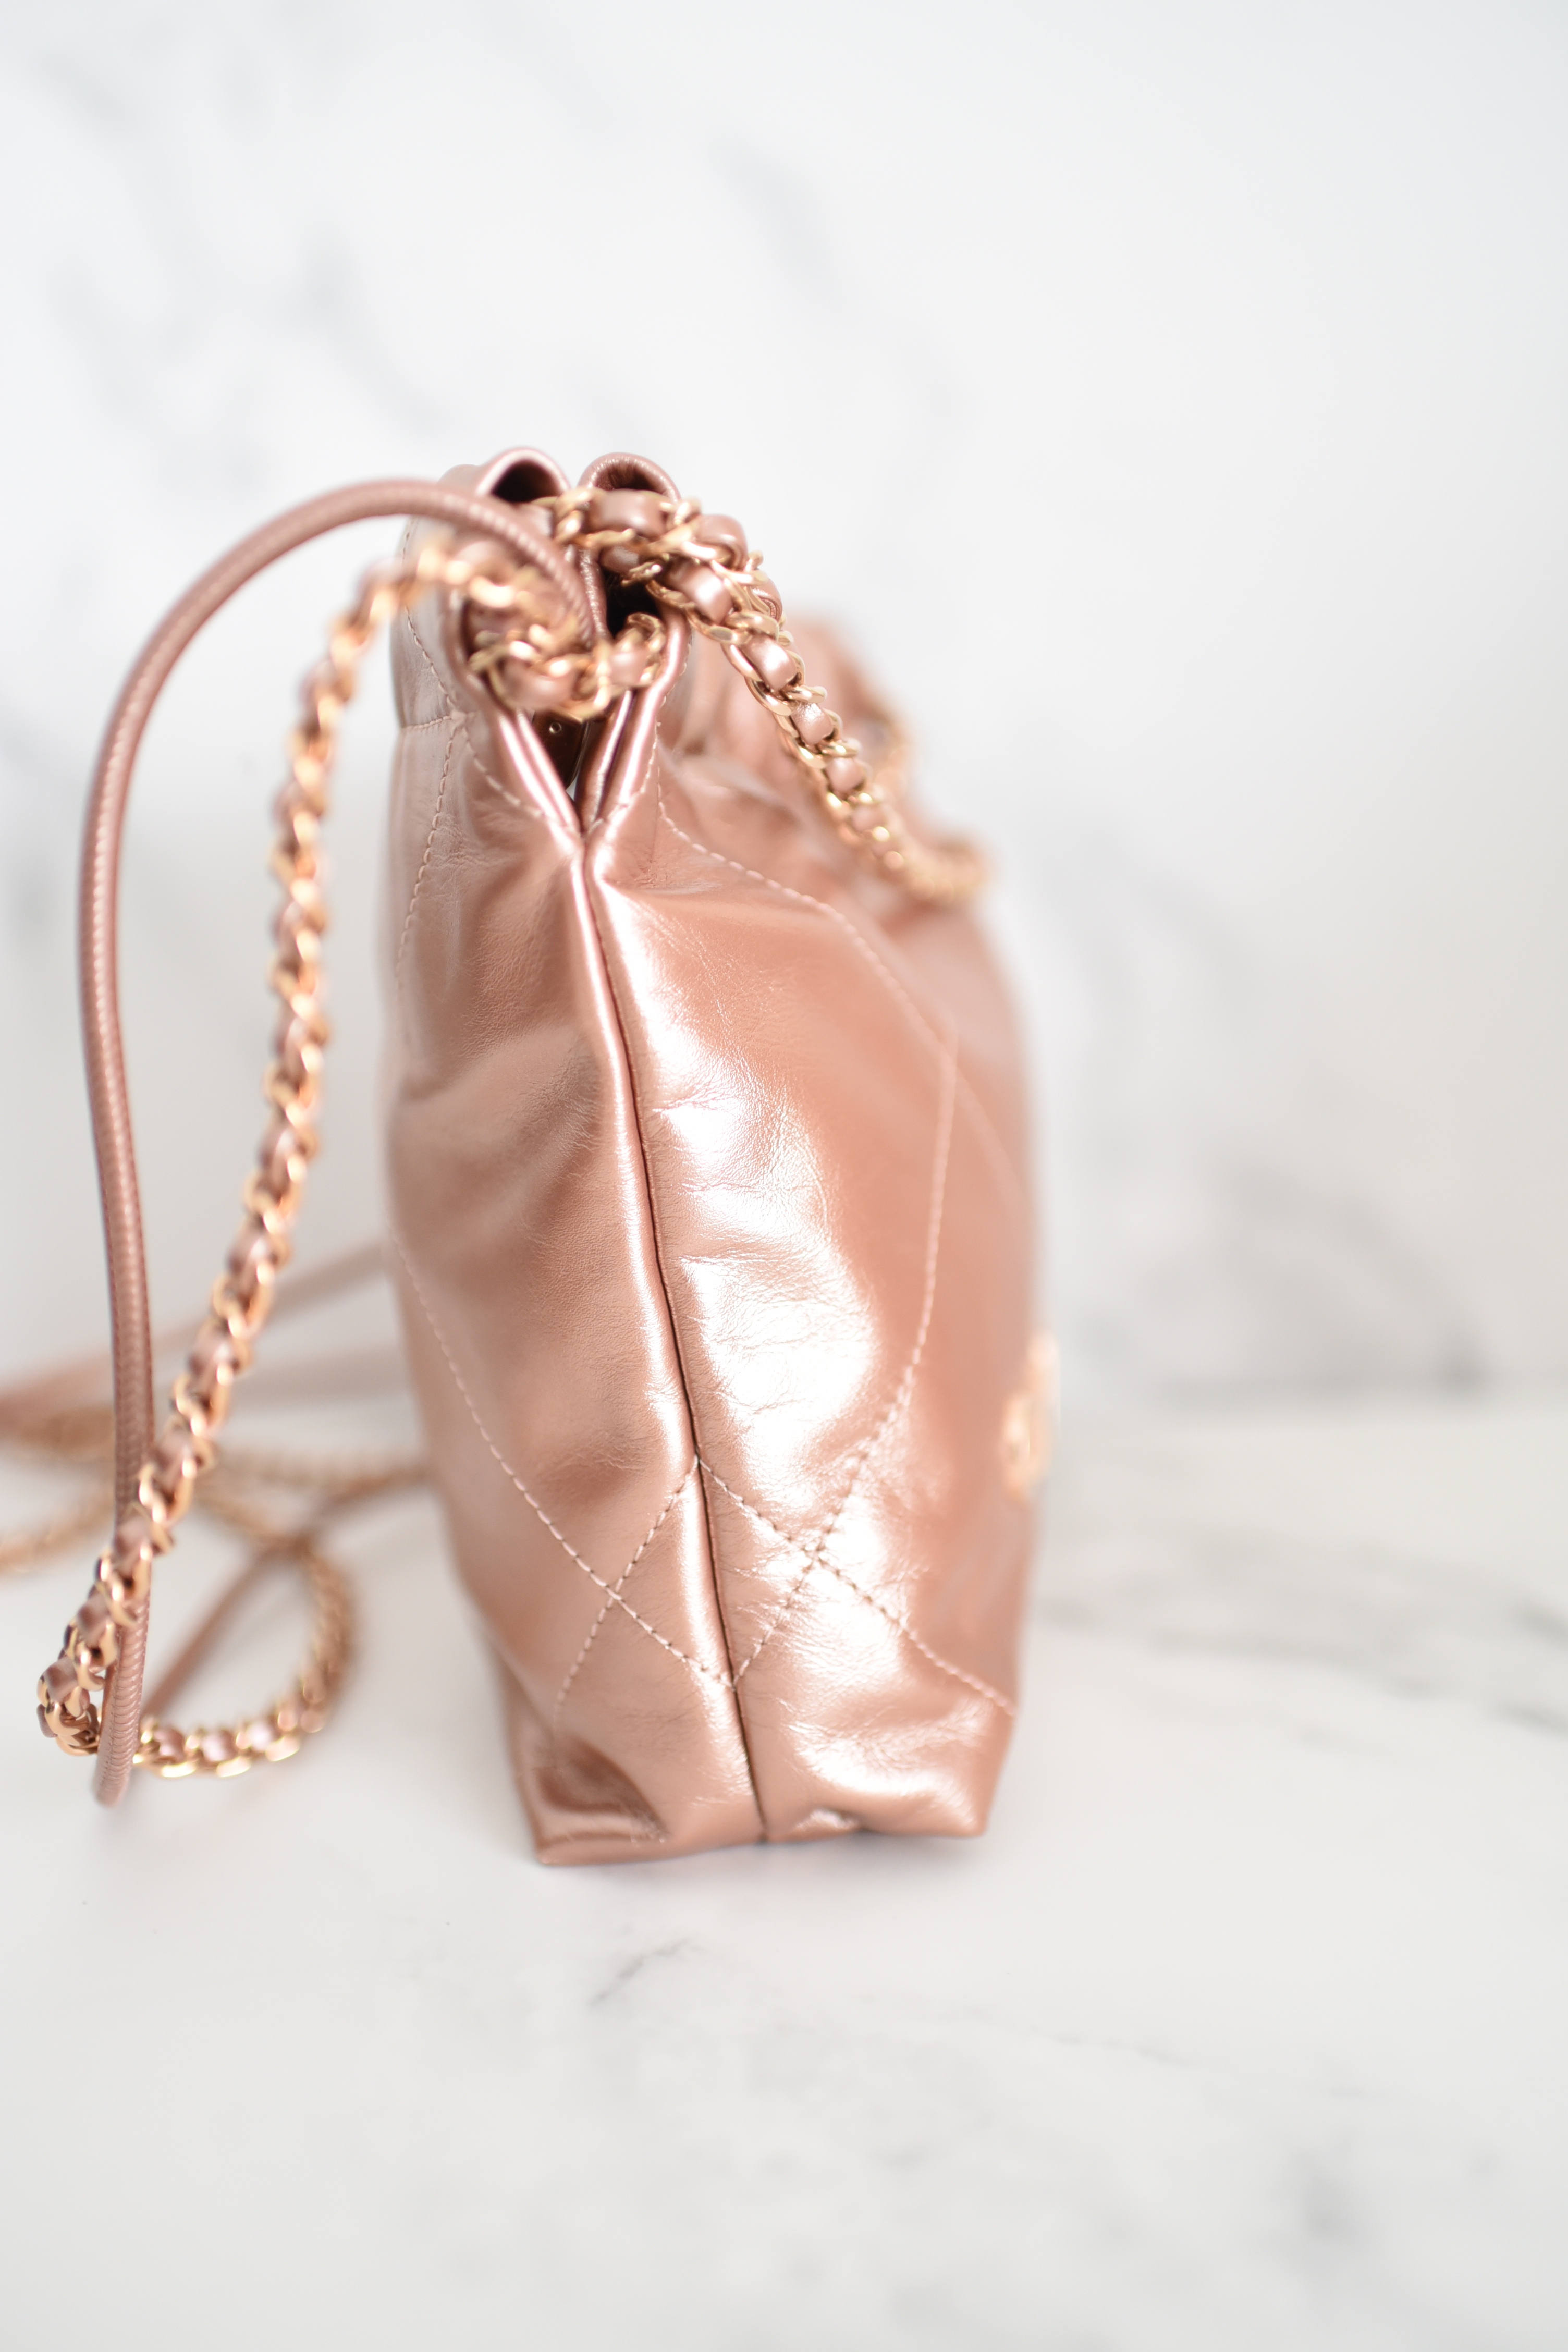 Chanel 22 Mini Quilted Hobo Tote, Rose Gold Calfskin with Gold Hardware, New  in Box GA001 - Julia Rose Boston